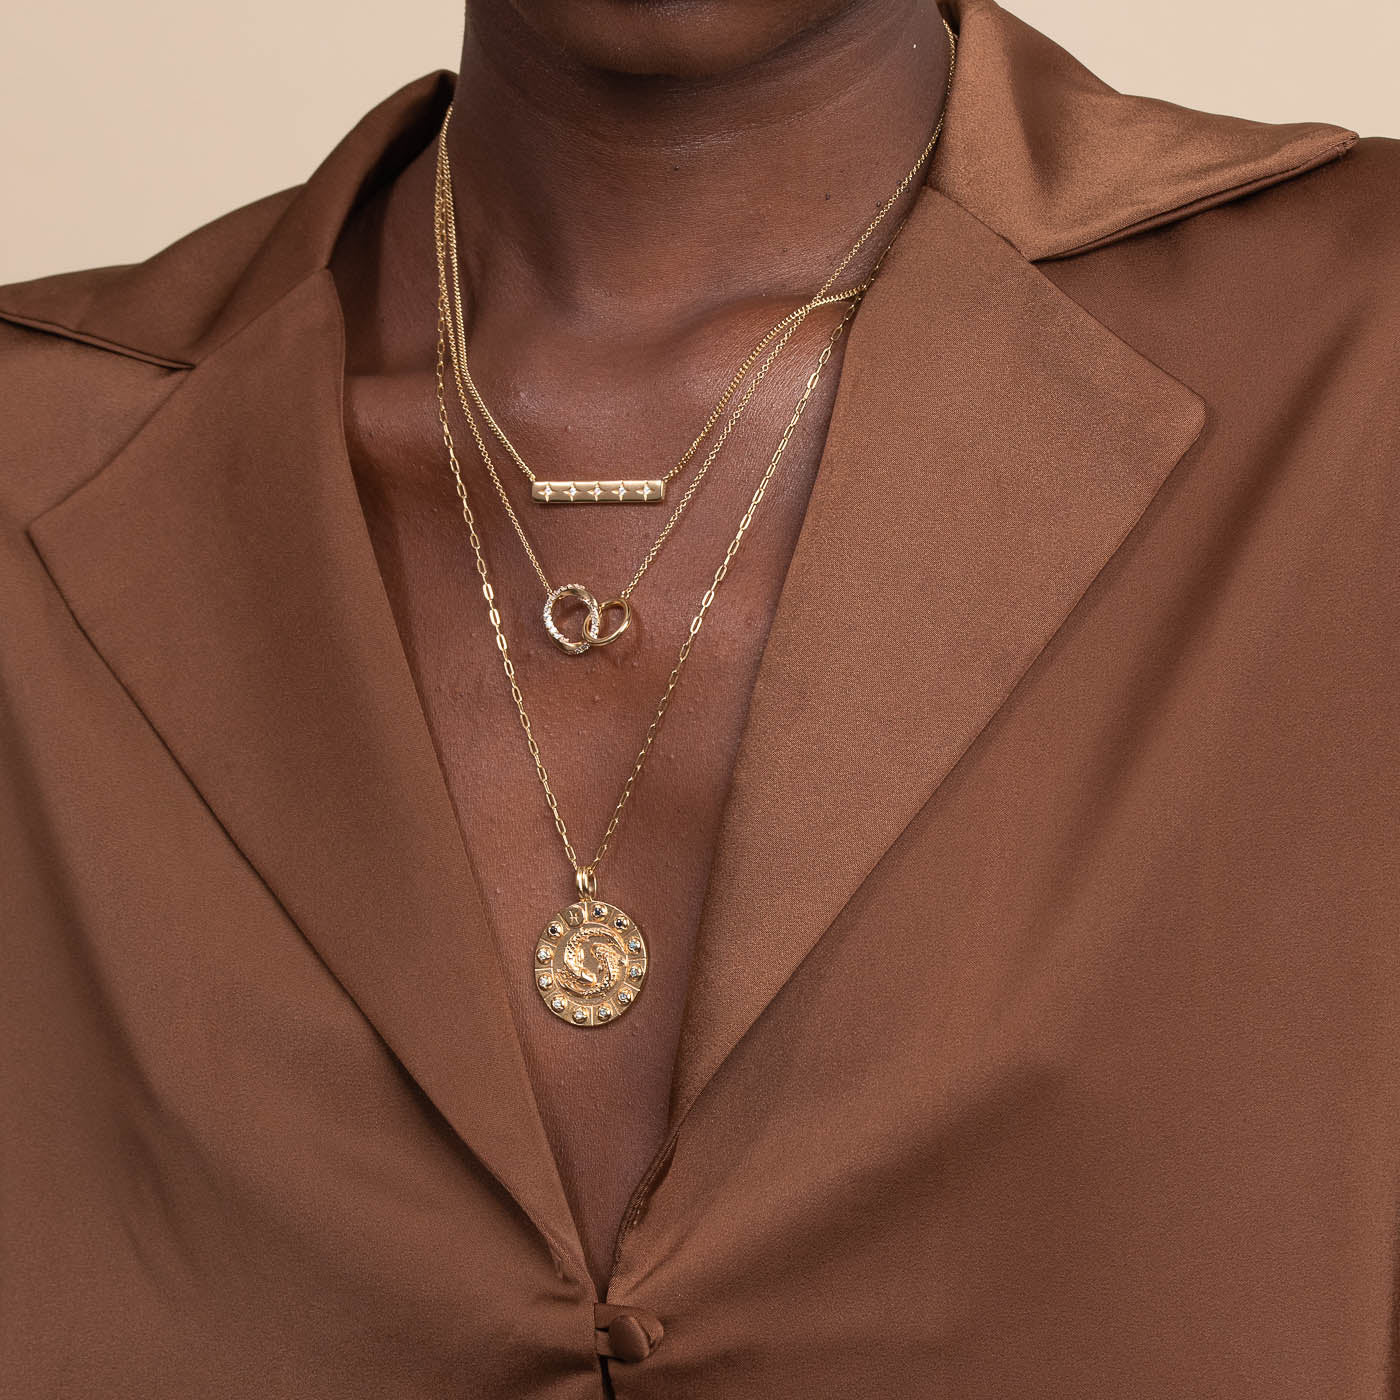 Pisces Bold Zodiac Pendant Necklace in Gold worn layered with necklaces